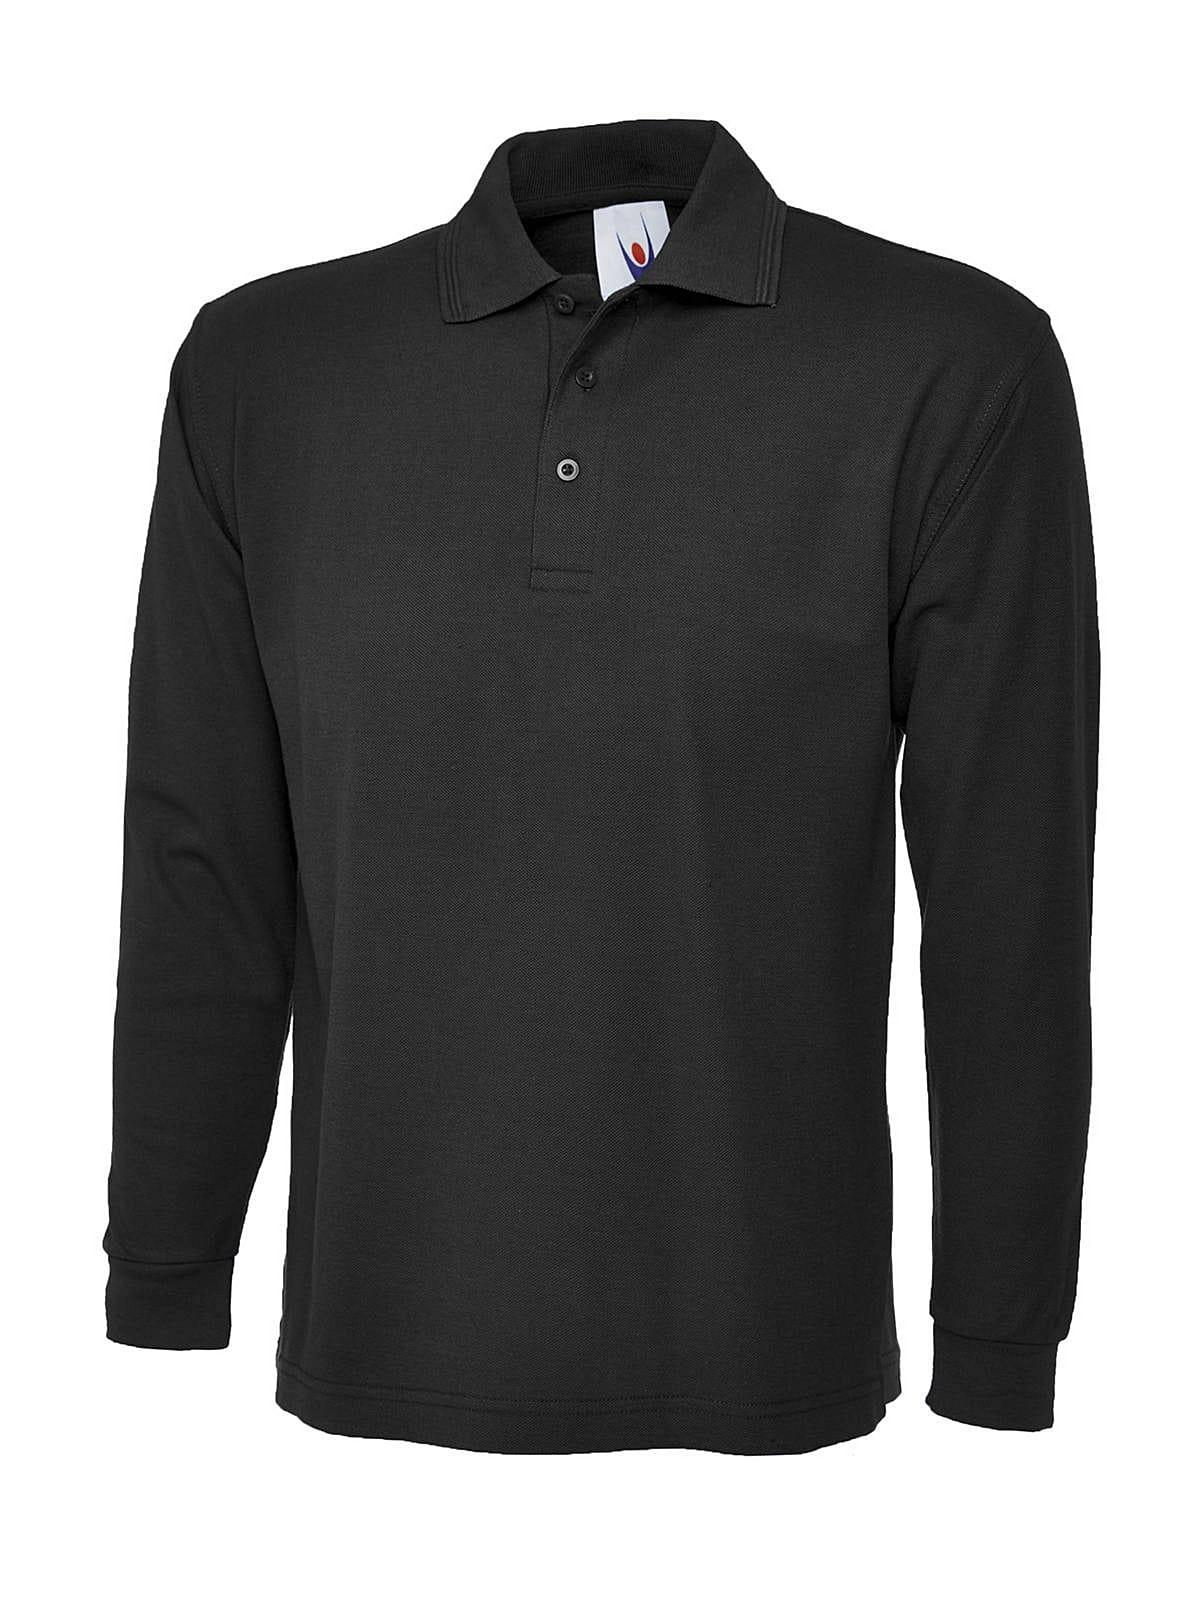 Uneek 220GSM Long-Sleeve Polo Shirt in Black (Product Code: UC113)